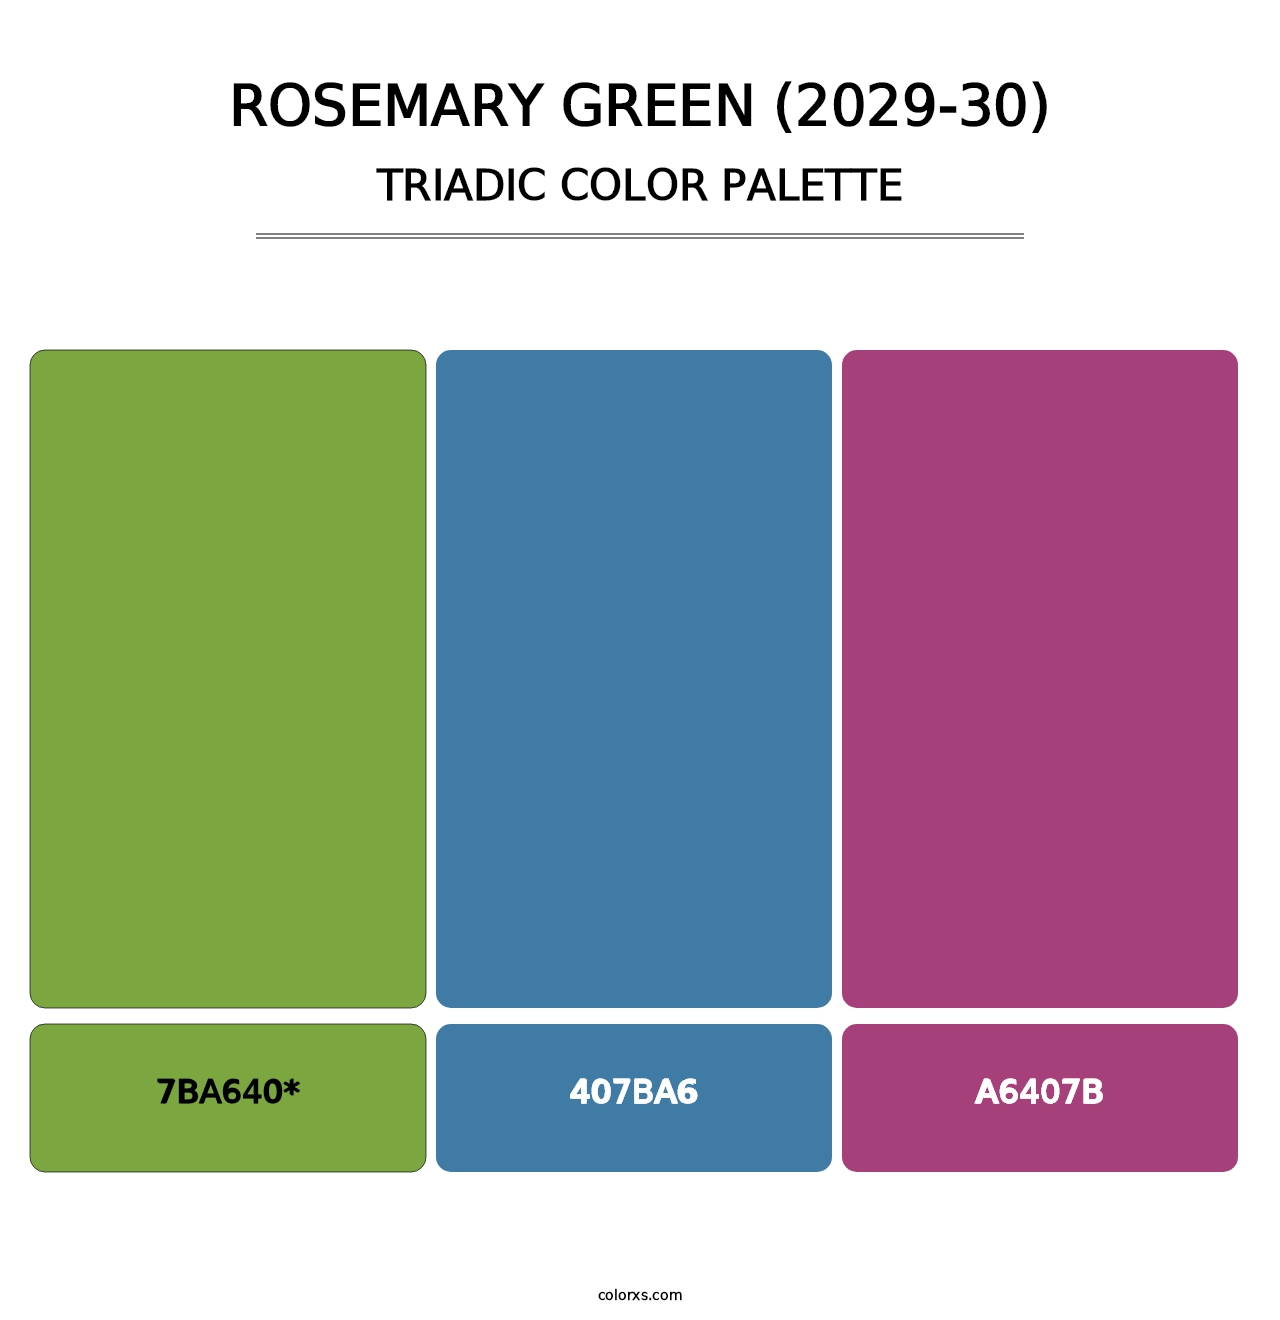 Rosemary Green (2029-30) - Triadic Color Palette